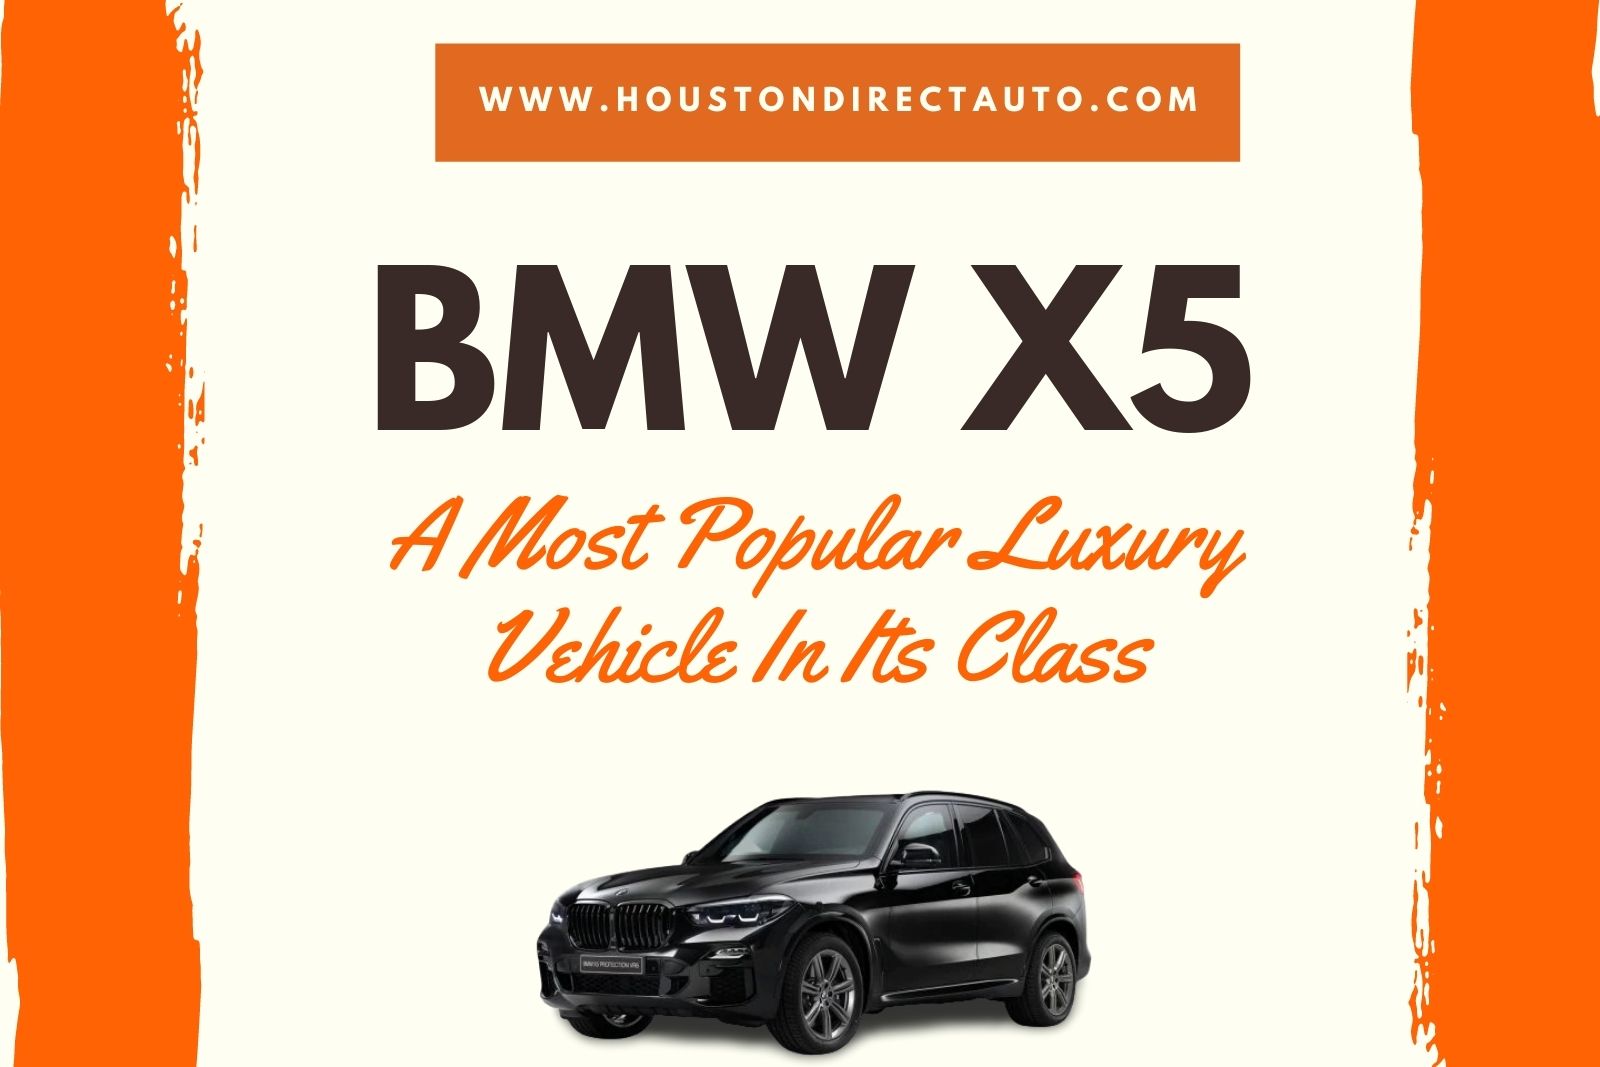 BMW X5 - A Most Popular Luxury Vehicle In Its Class